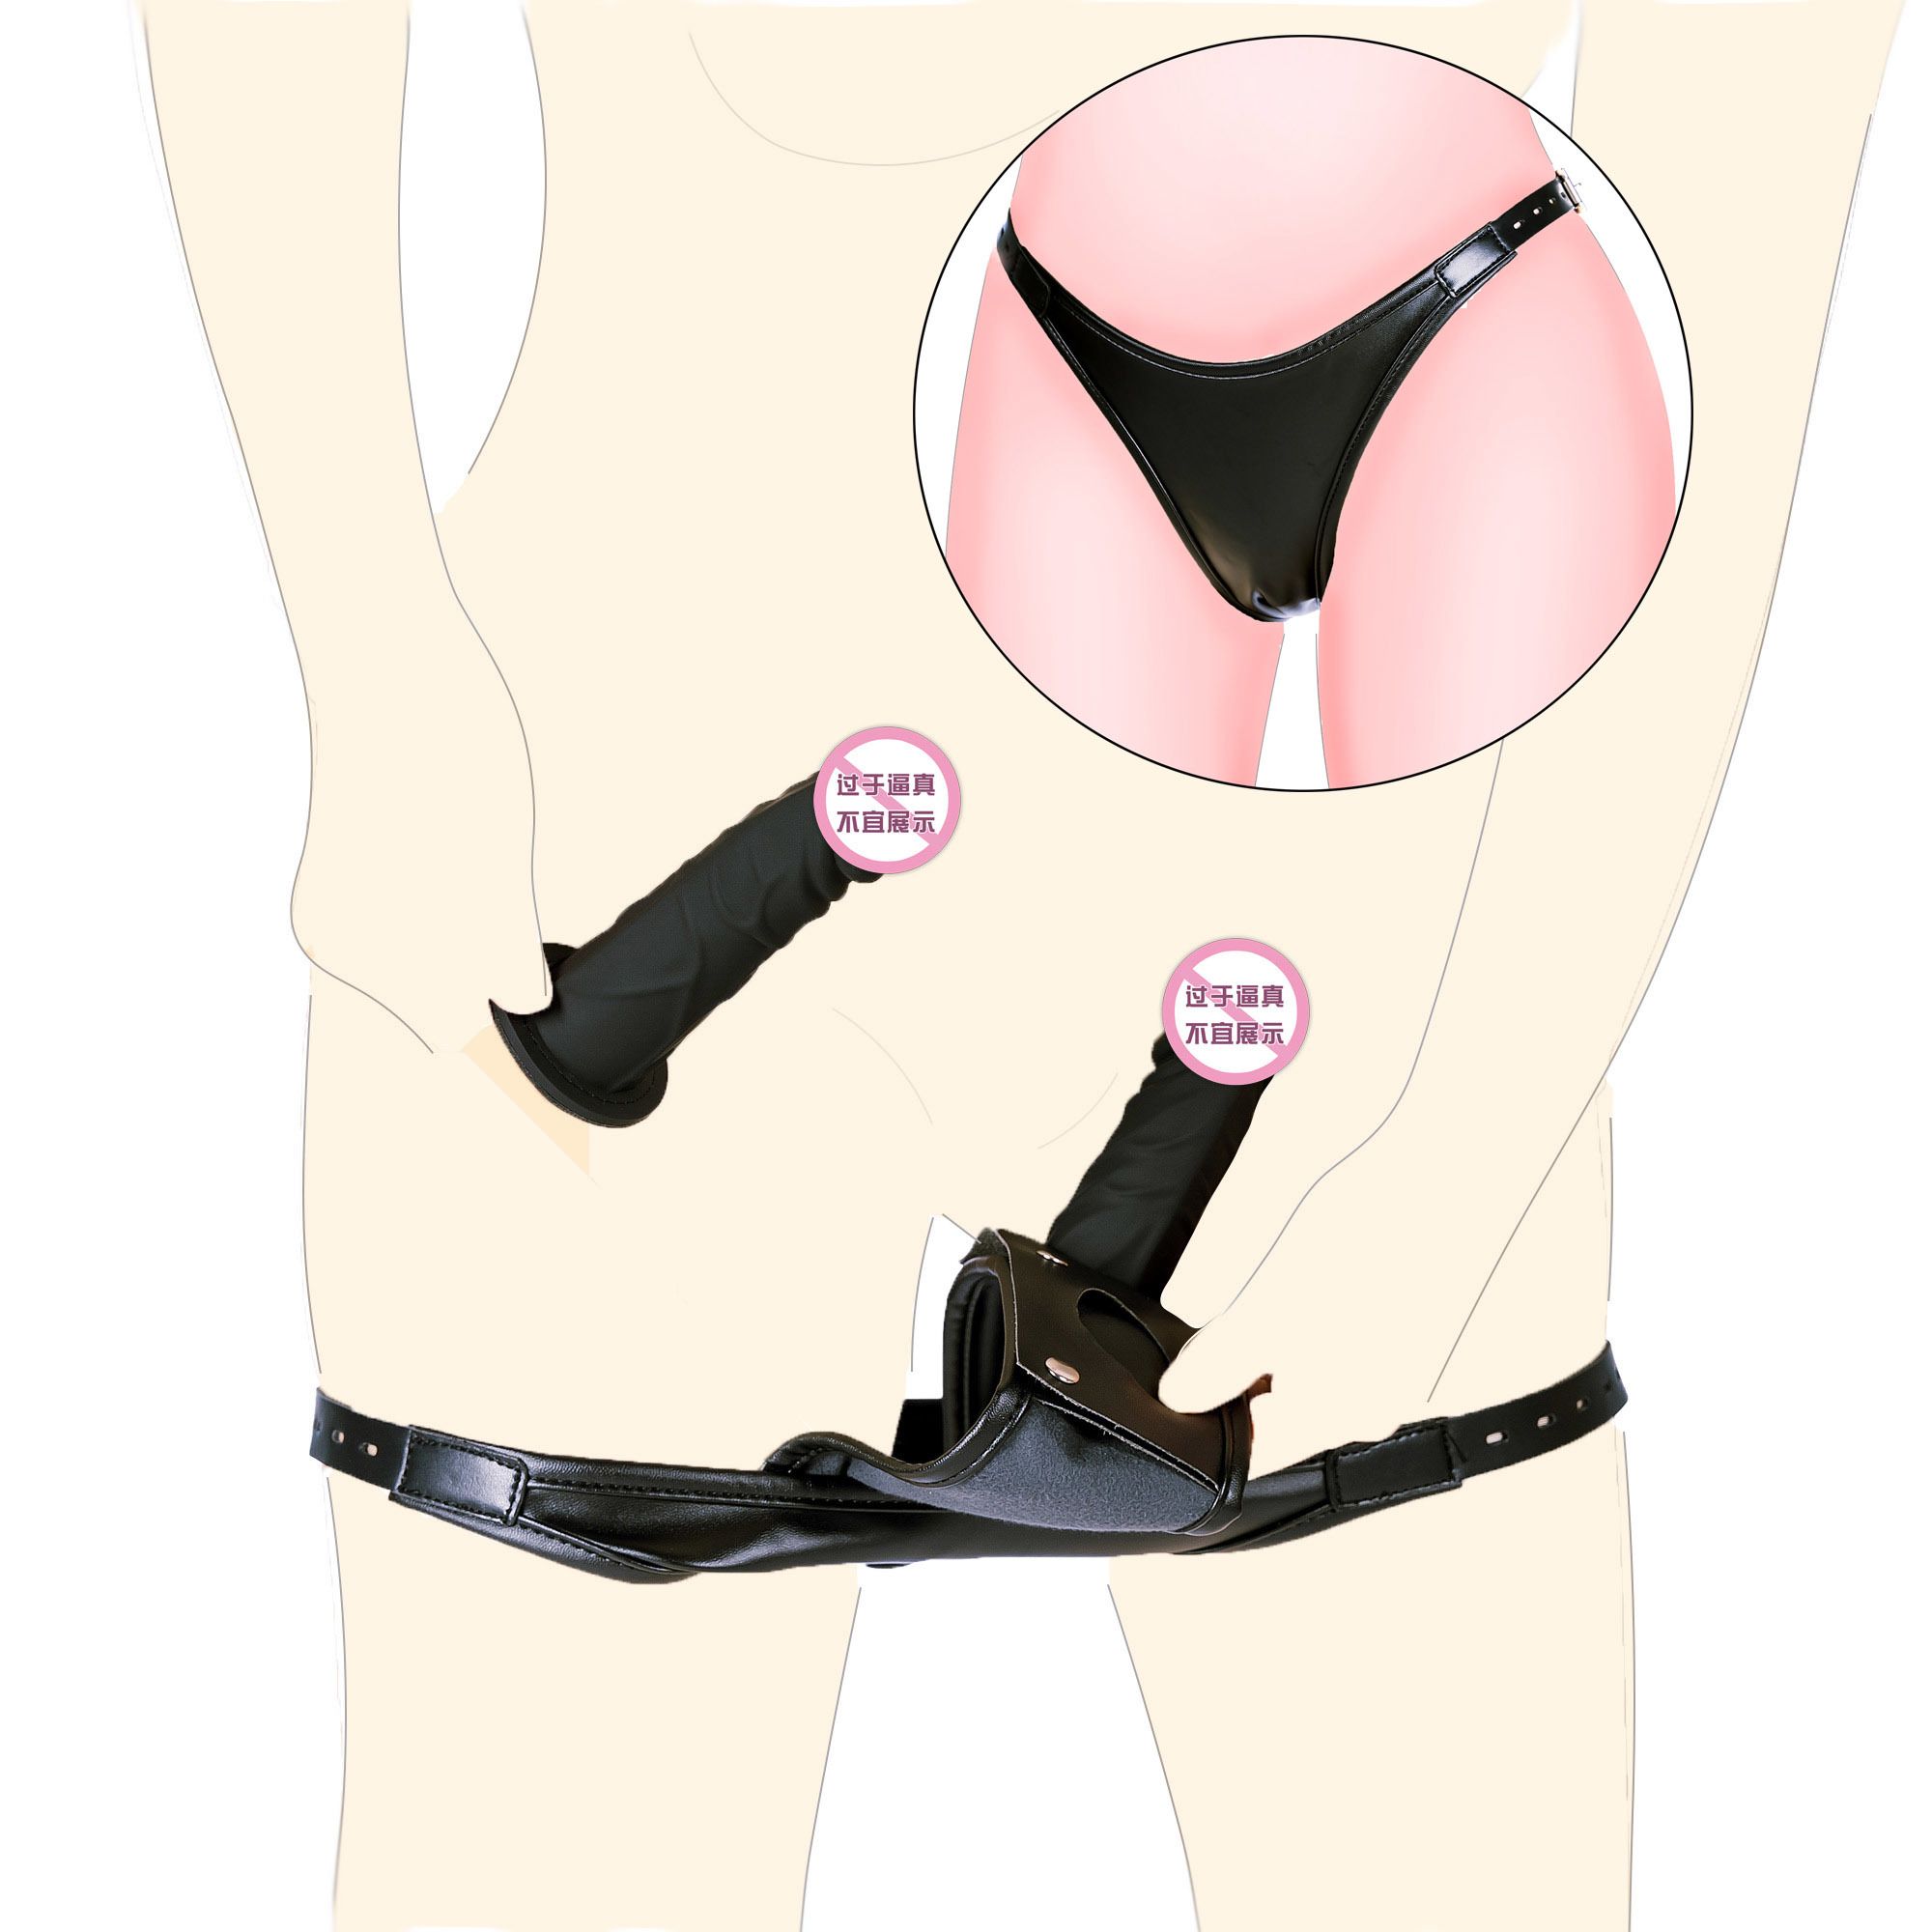 Massage Strapon Leather Chastity Panties,Detachable Silicone Dildo Anal Butt Plugs,Erotic Sex Toys For Women Masturbation Soft Pants From Sextoy_factorystore, $15.38 DHgate